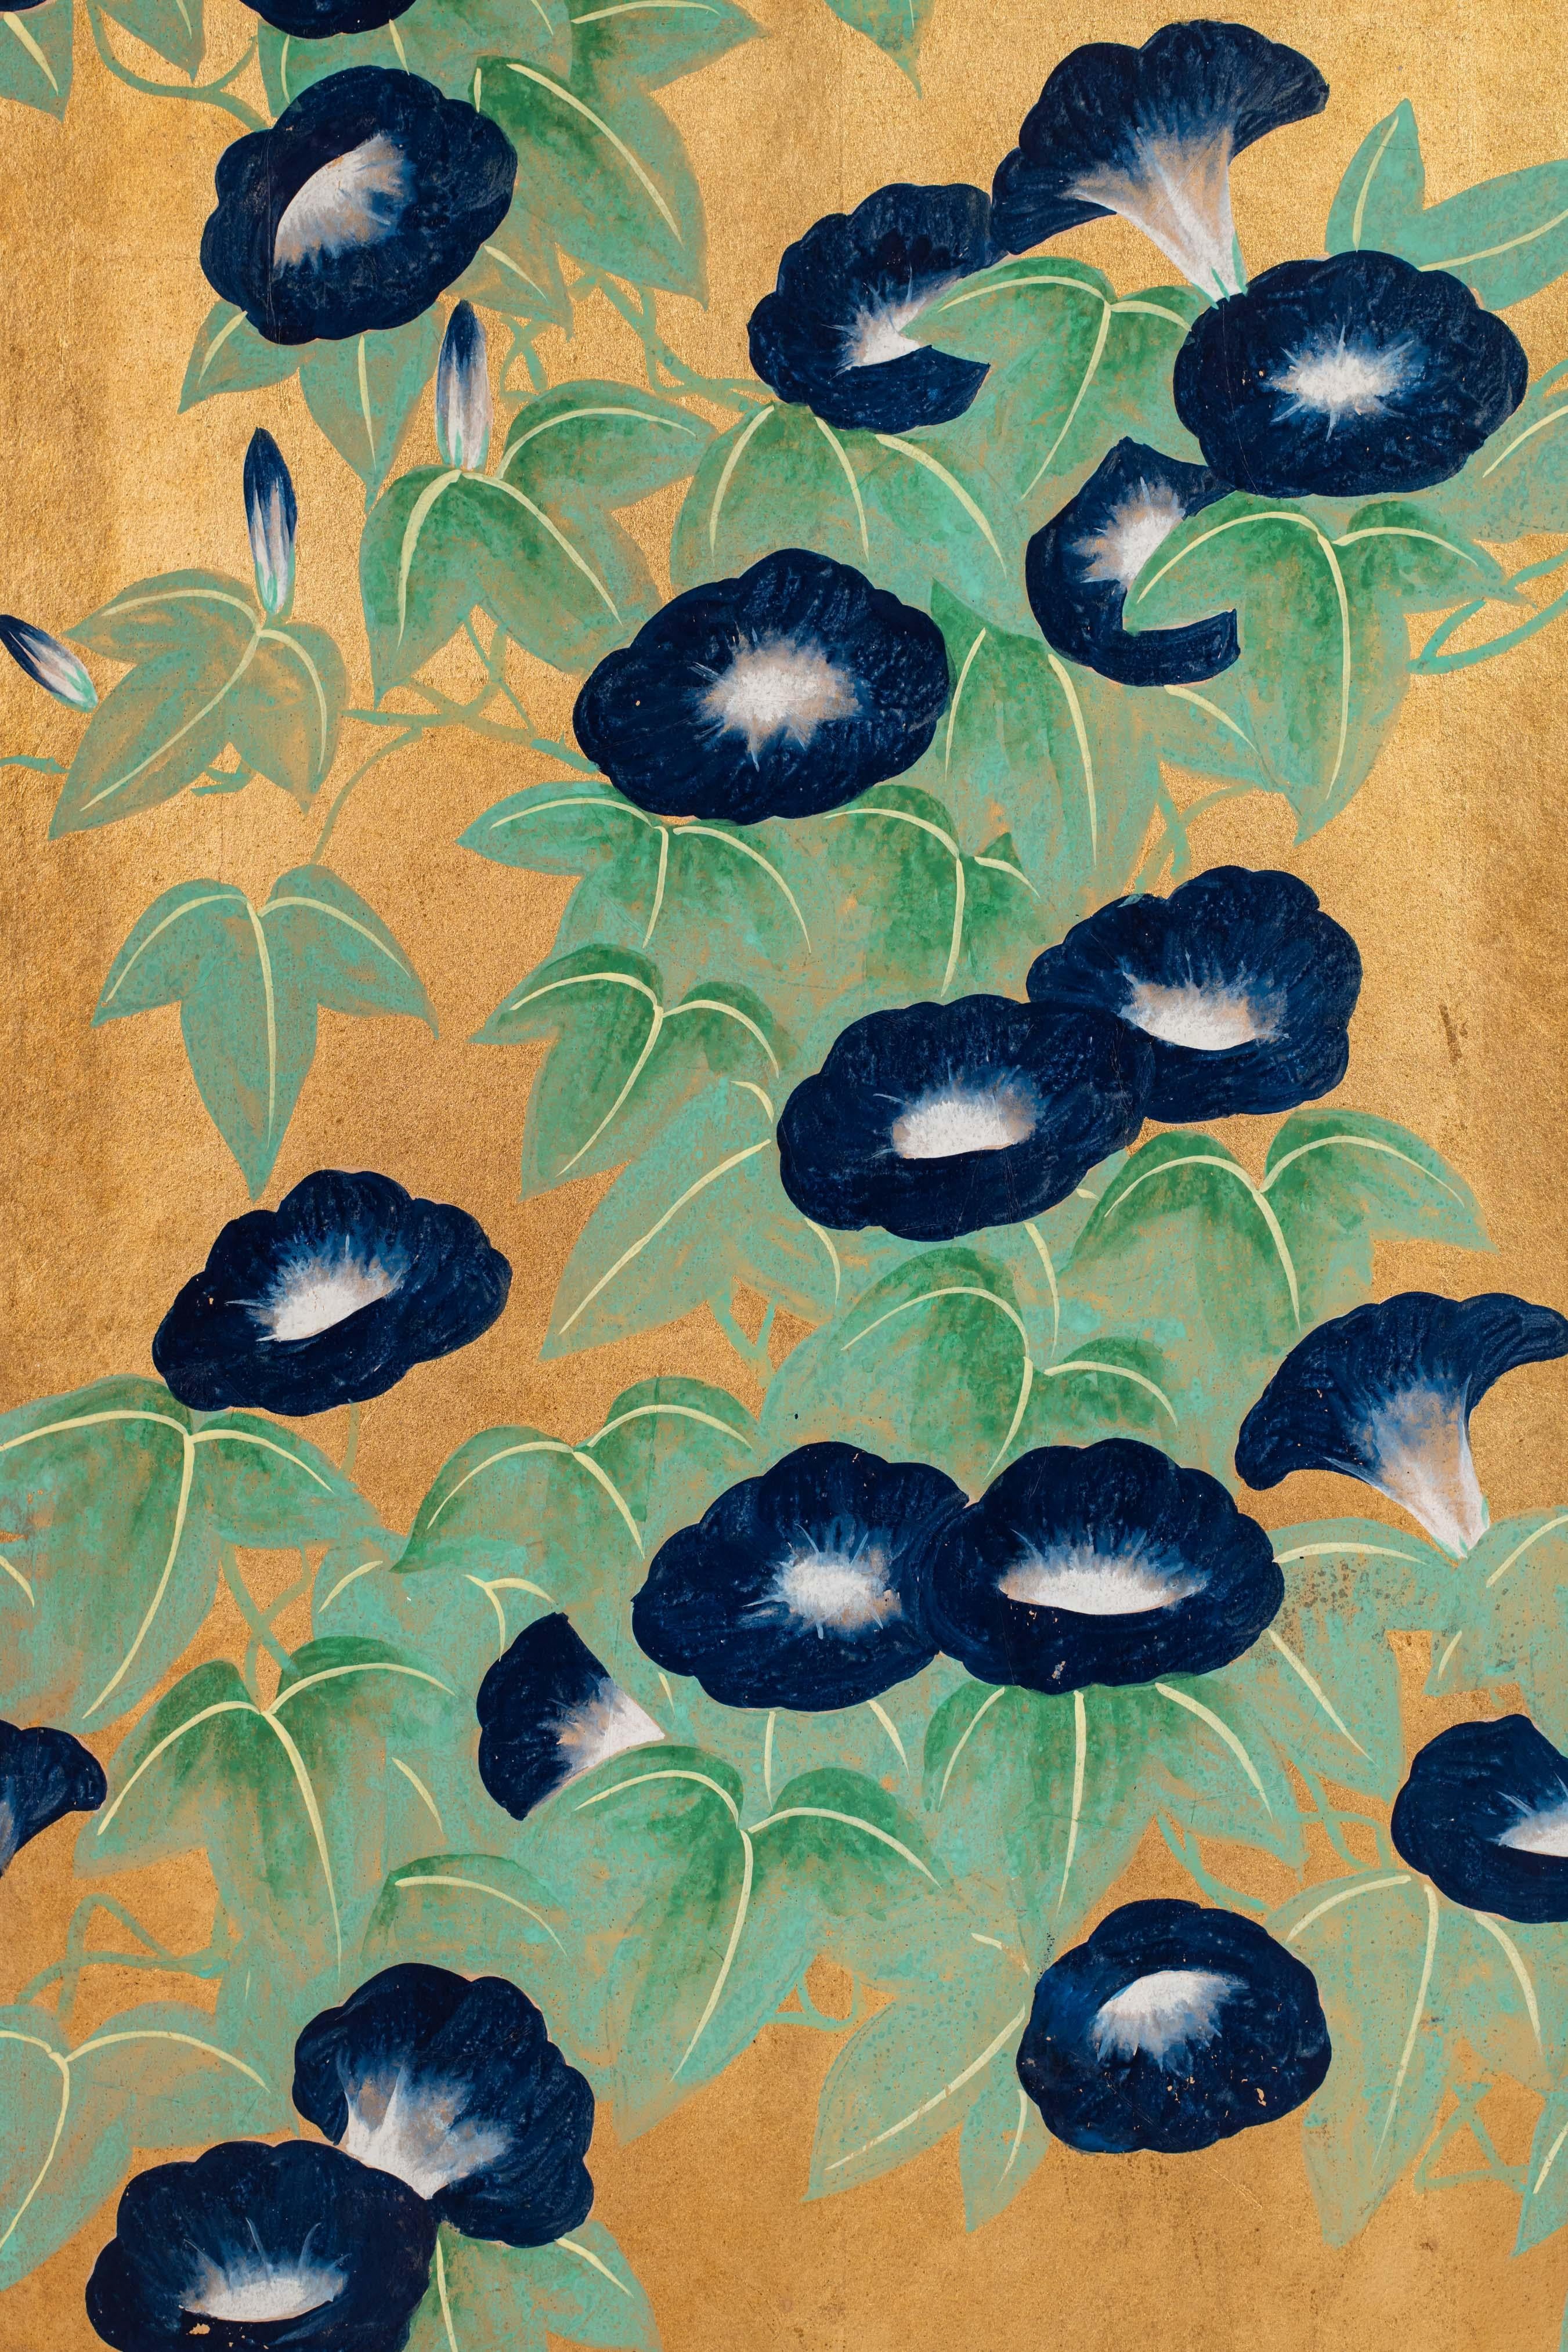 Hand-Crafted Contemporary Hand-Painted Japanese Screen of Morning Glory